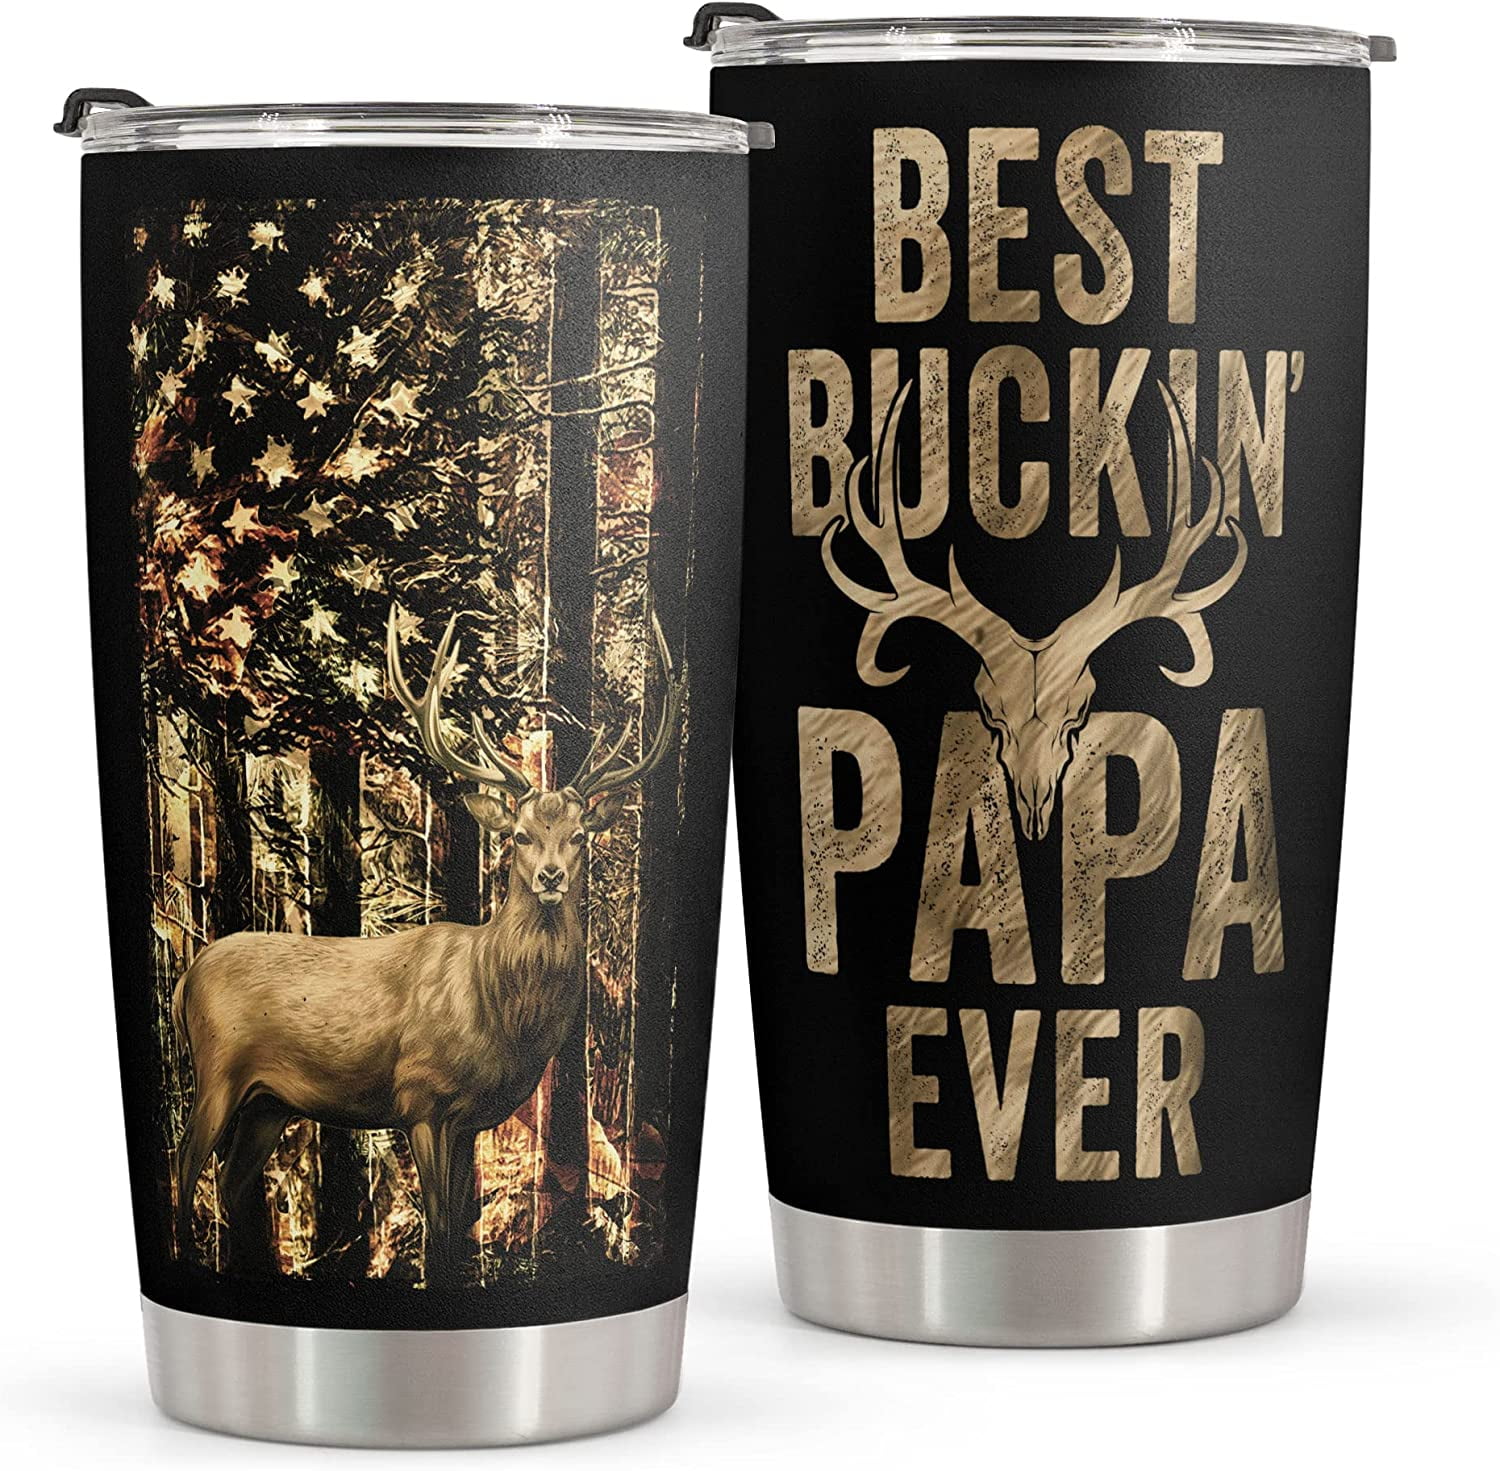 Rather Be Hunting Insulated Stainless Steel Drink Tumbler, (30 Ounce) -  Hunting Gift for Men - Unique Birthday or Christmas Idea for Deer, Bear,  Duck, Bird, and Camo Dads and Bow Hunters